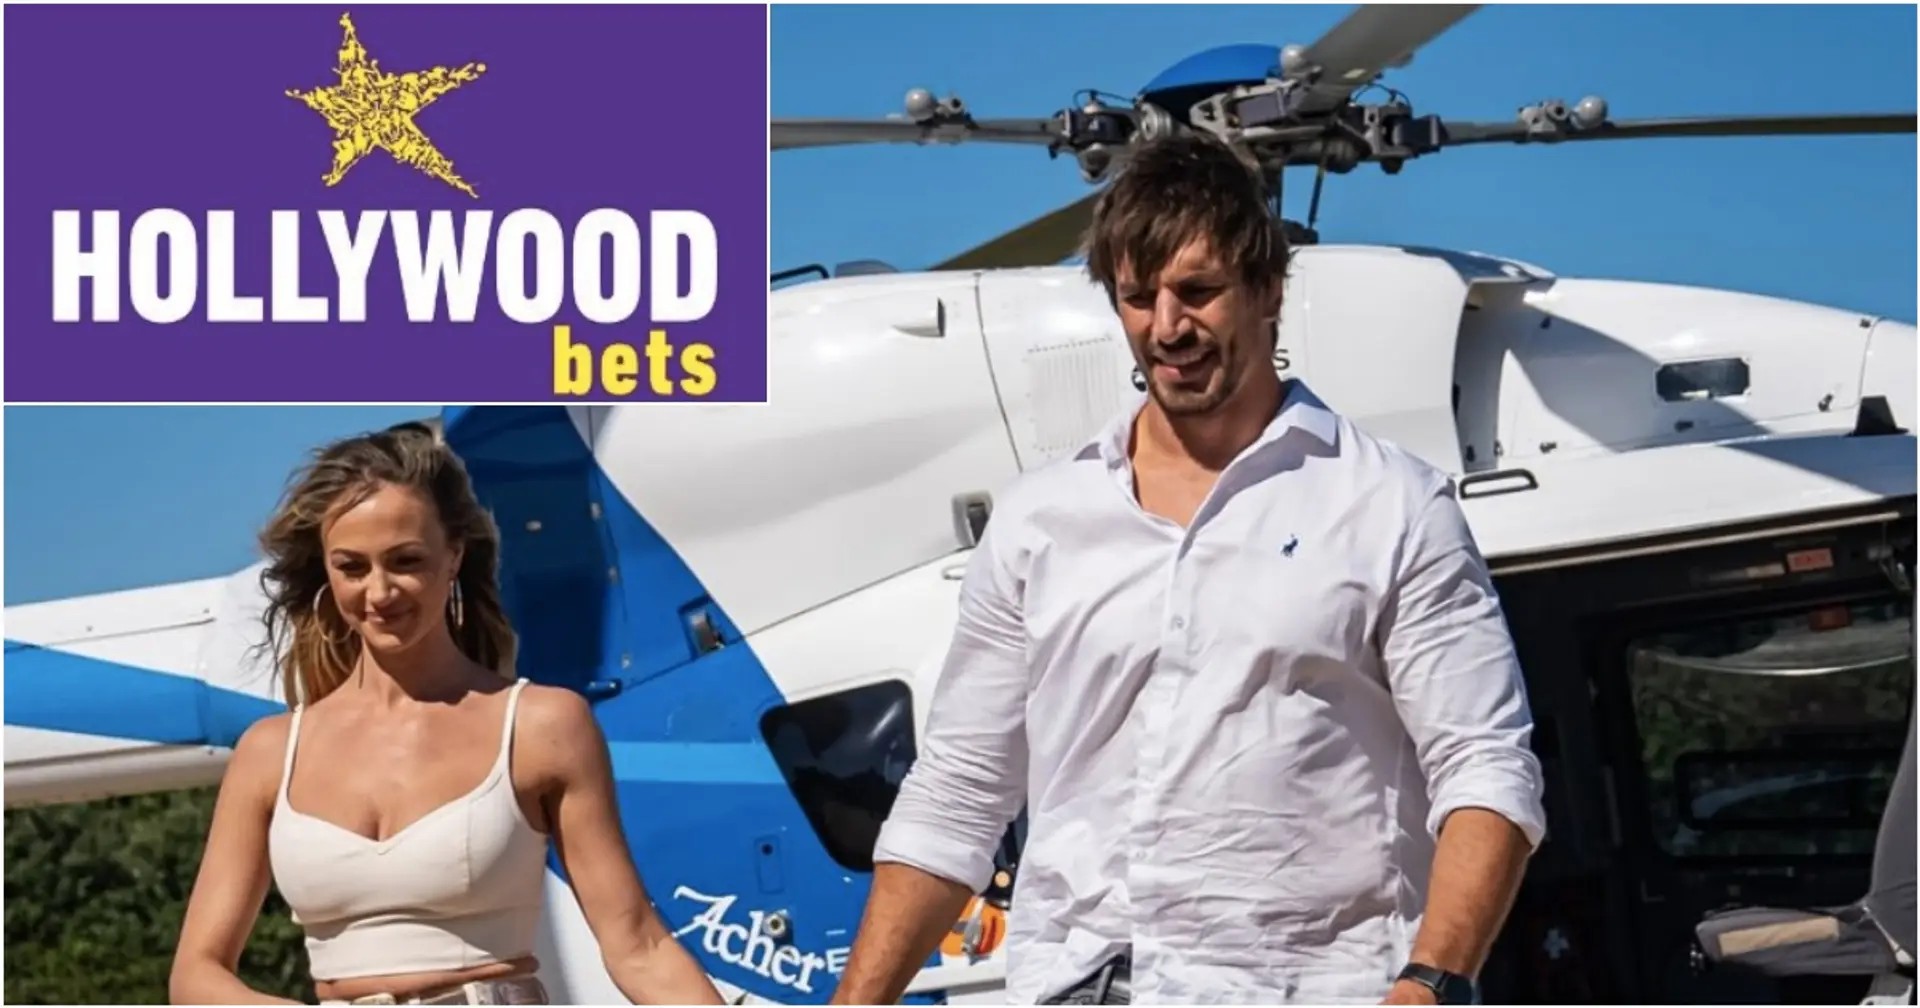 Hollywoodbets unveil South Africa rugby star Eben Etzebeth and his wife as new ambassador